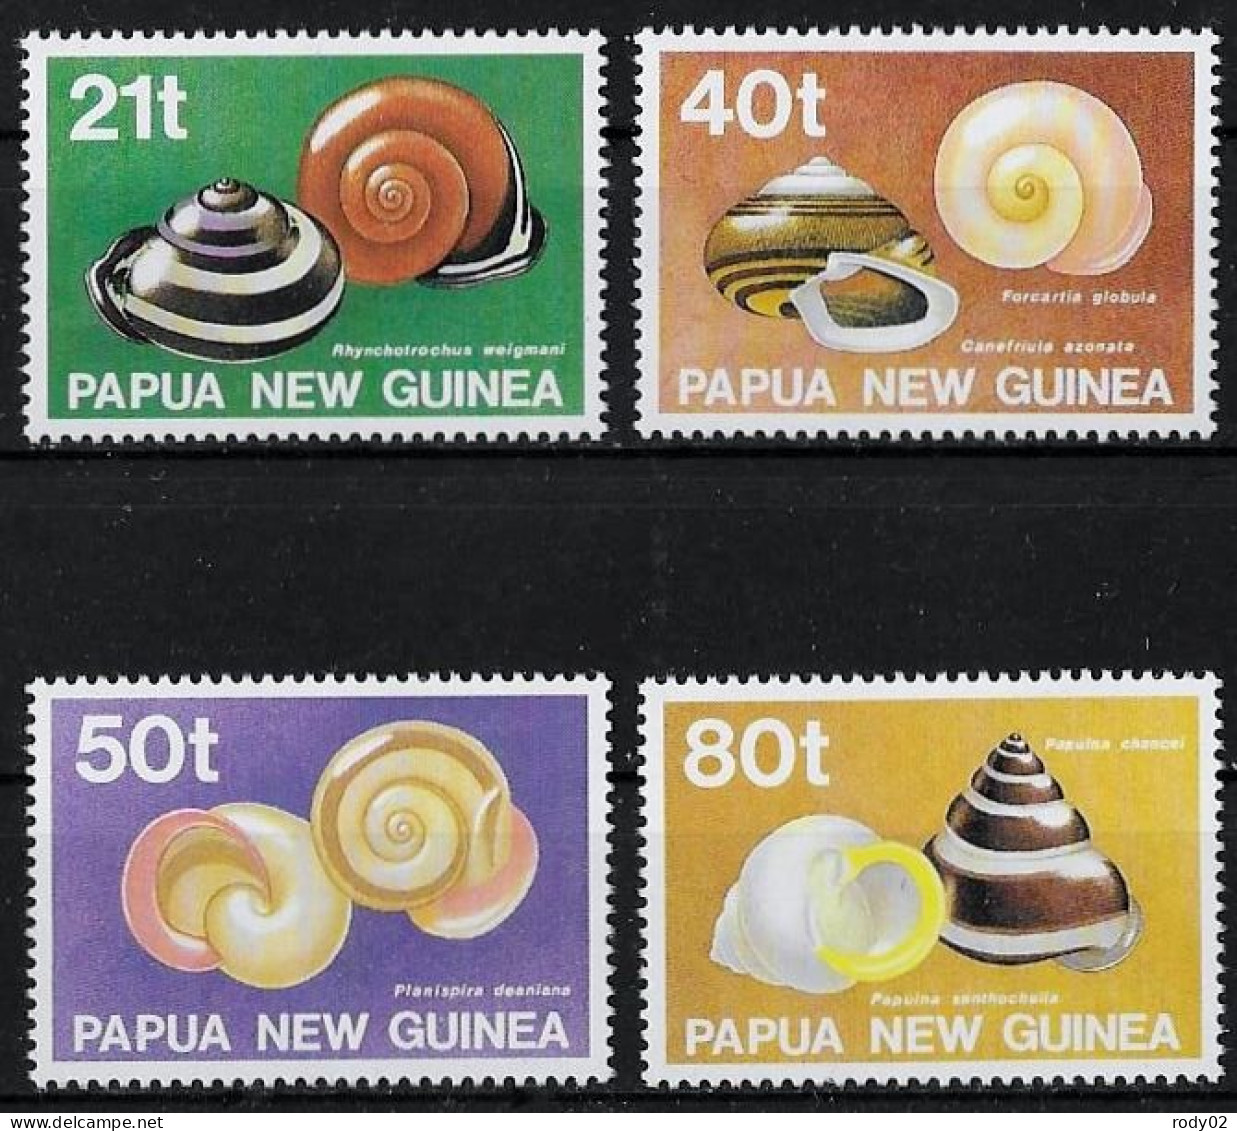 PAPOUASIE NOUVELLE-GUINEE - COQUILLAGES - N° 626 A 629 - NEUF** MNH - Coquillages